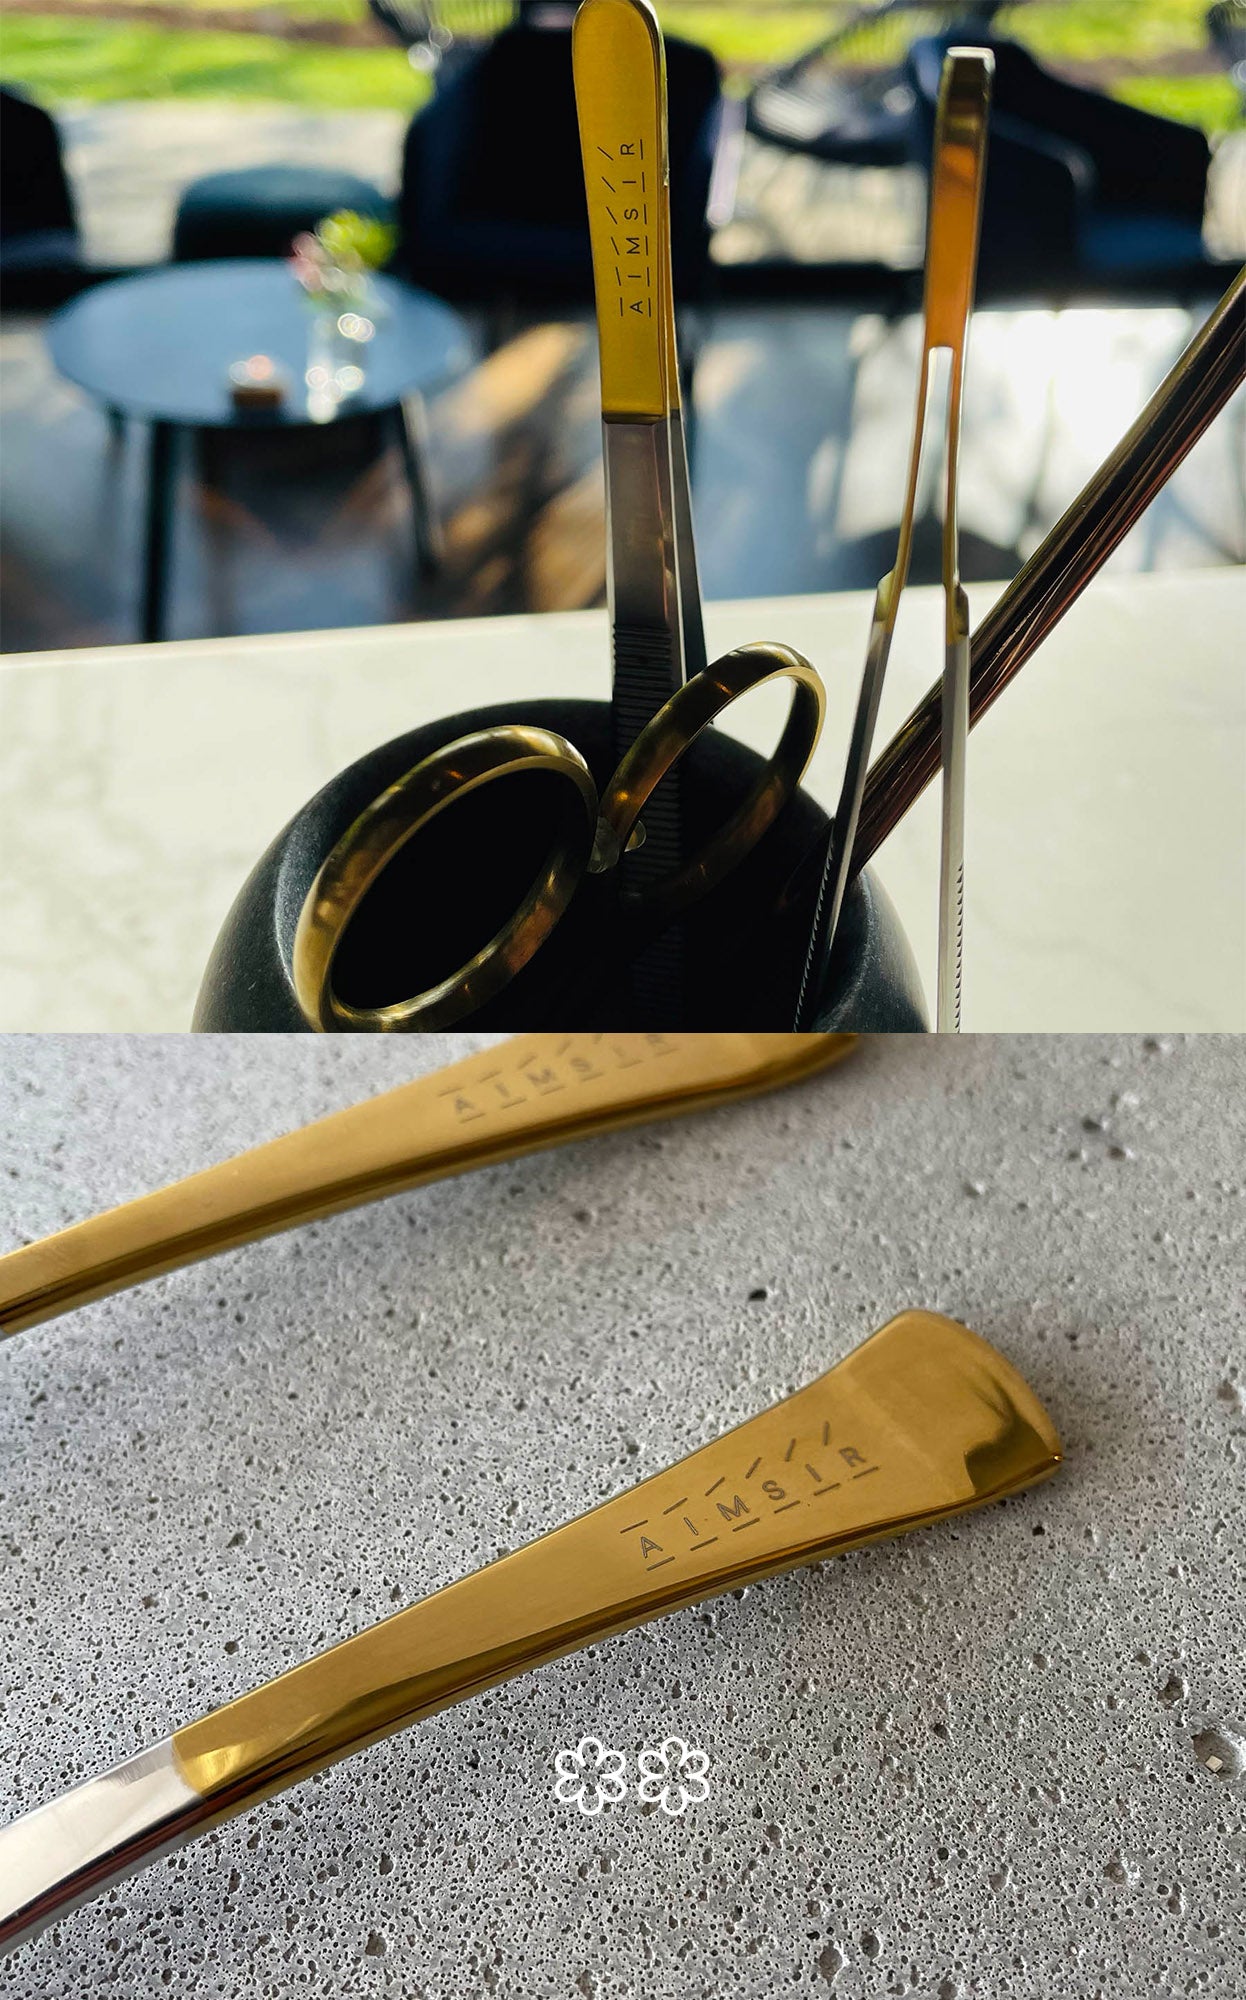 Oui Chef tools with Aimsir logo engraved on them